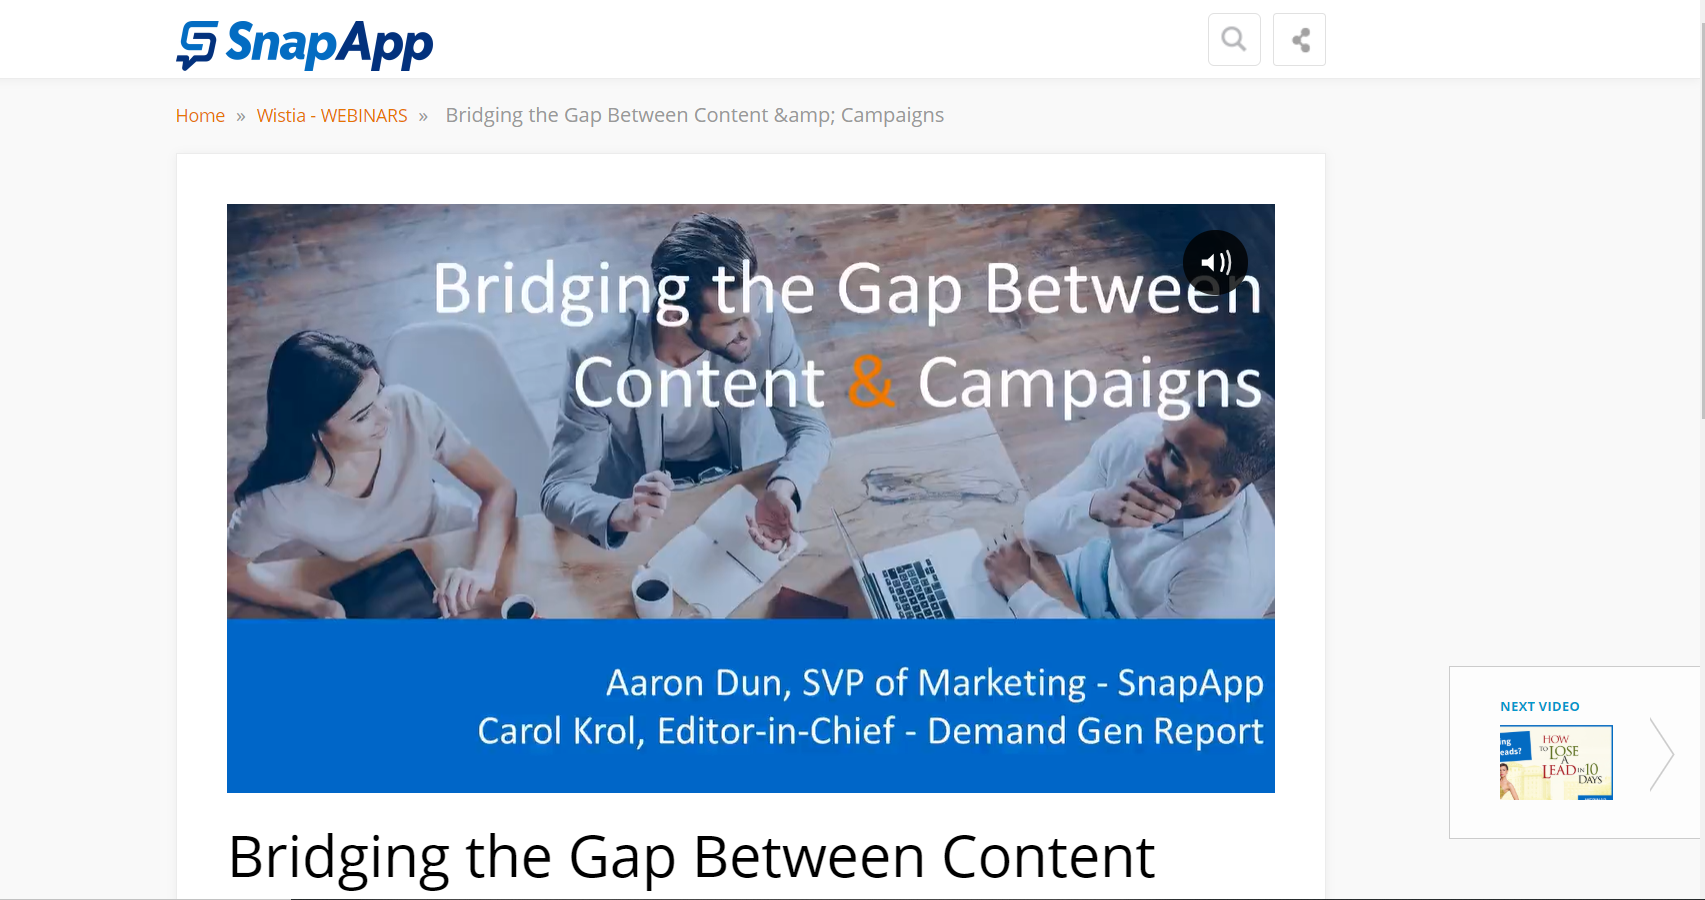 This is an example of content marketing in the form of a webinar